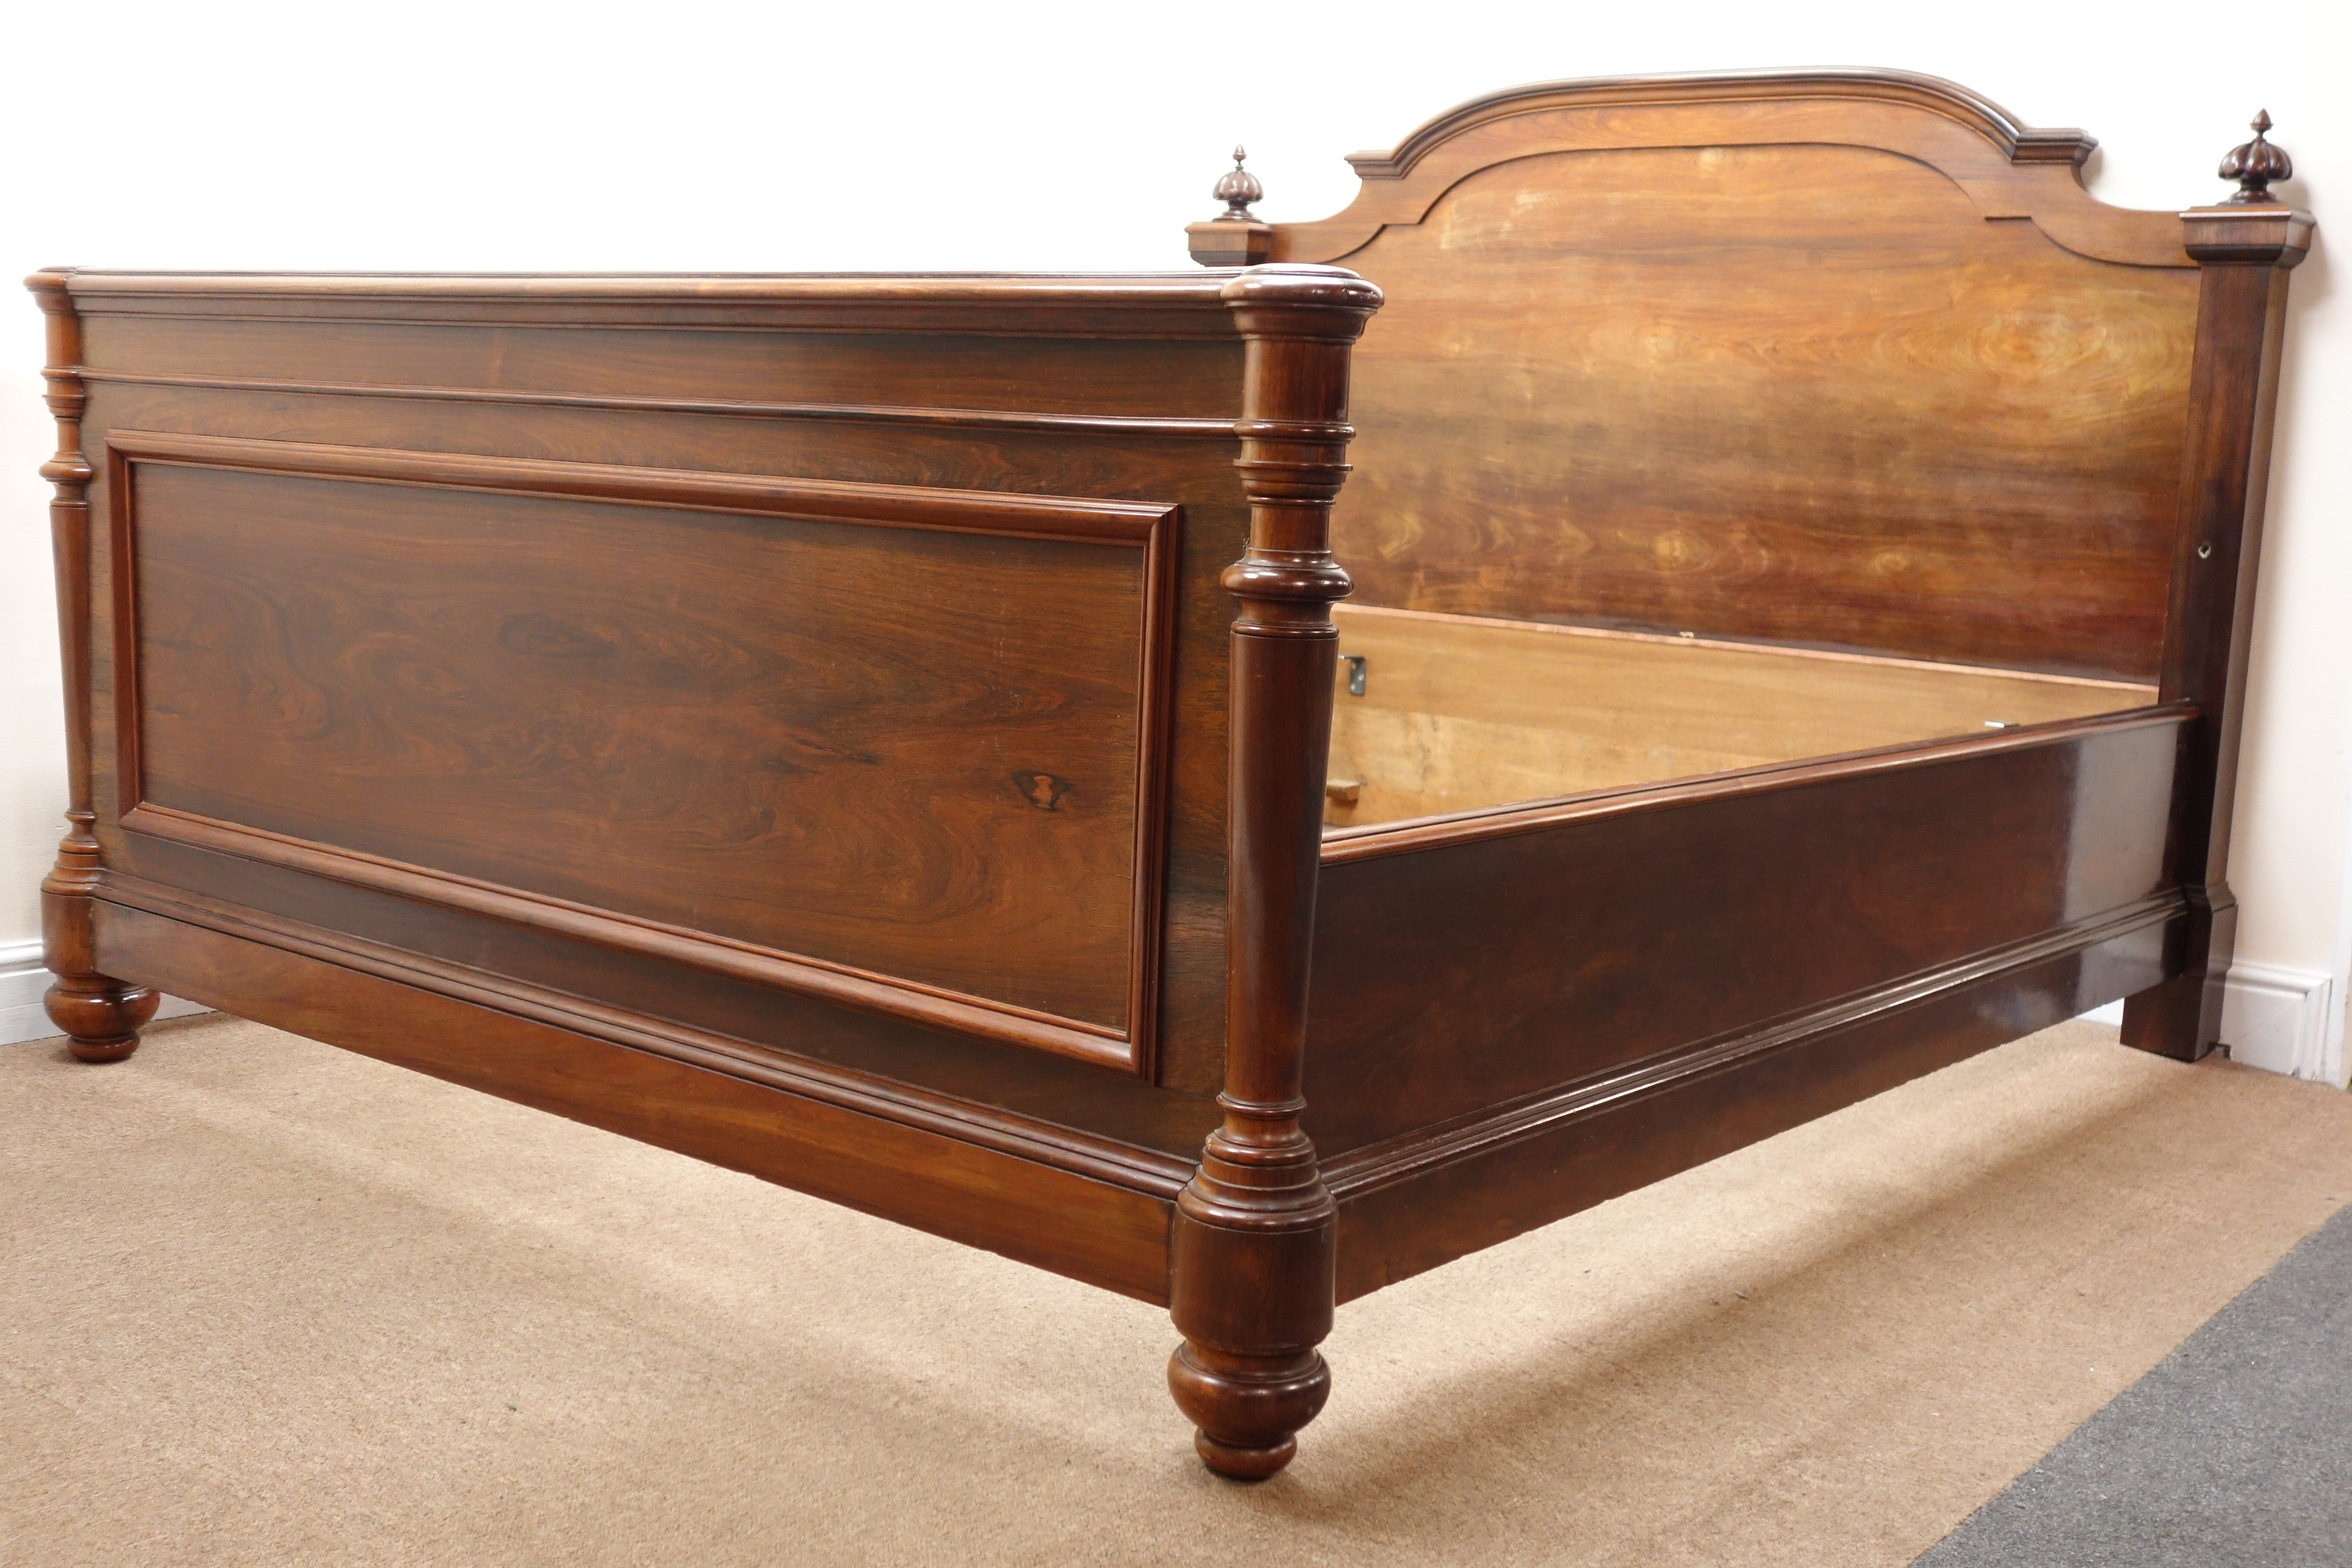 19th century French rosewood double bed stead, the stepped arched headboard with lobed finials, - Image 2 of 9